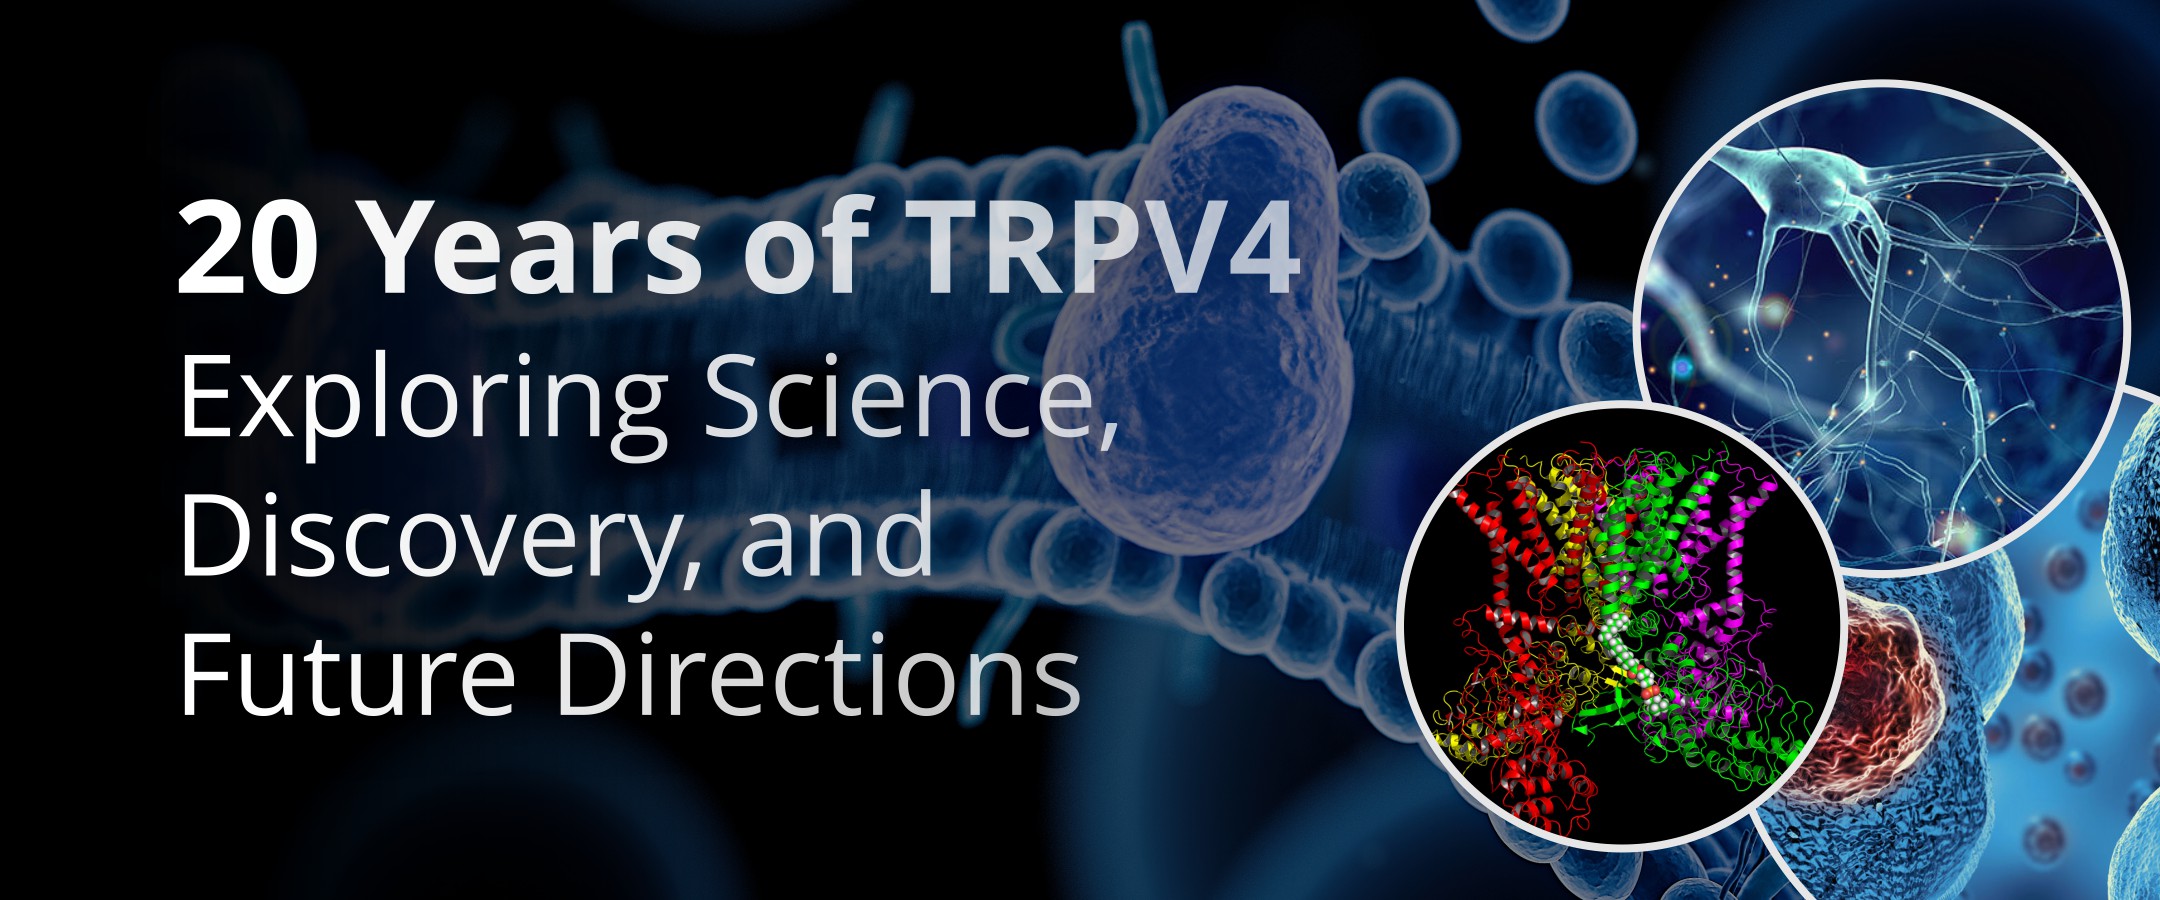 20 Years of TRPV4 - Exploring Science, Discovery, and Future Directions